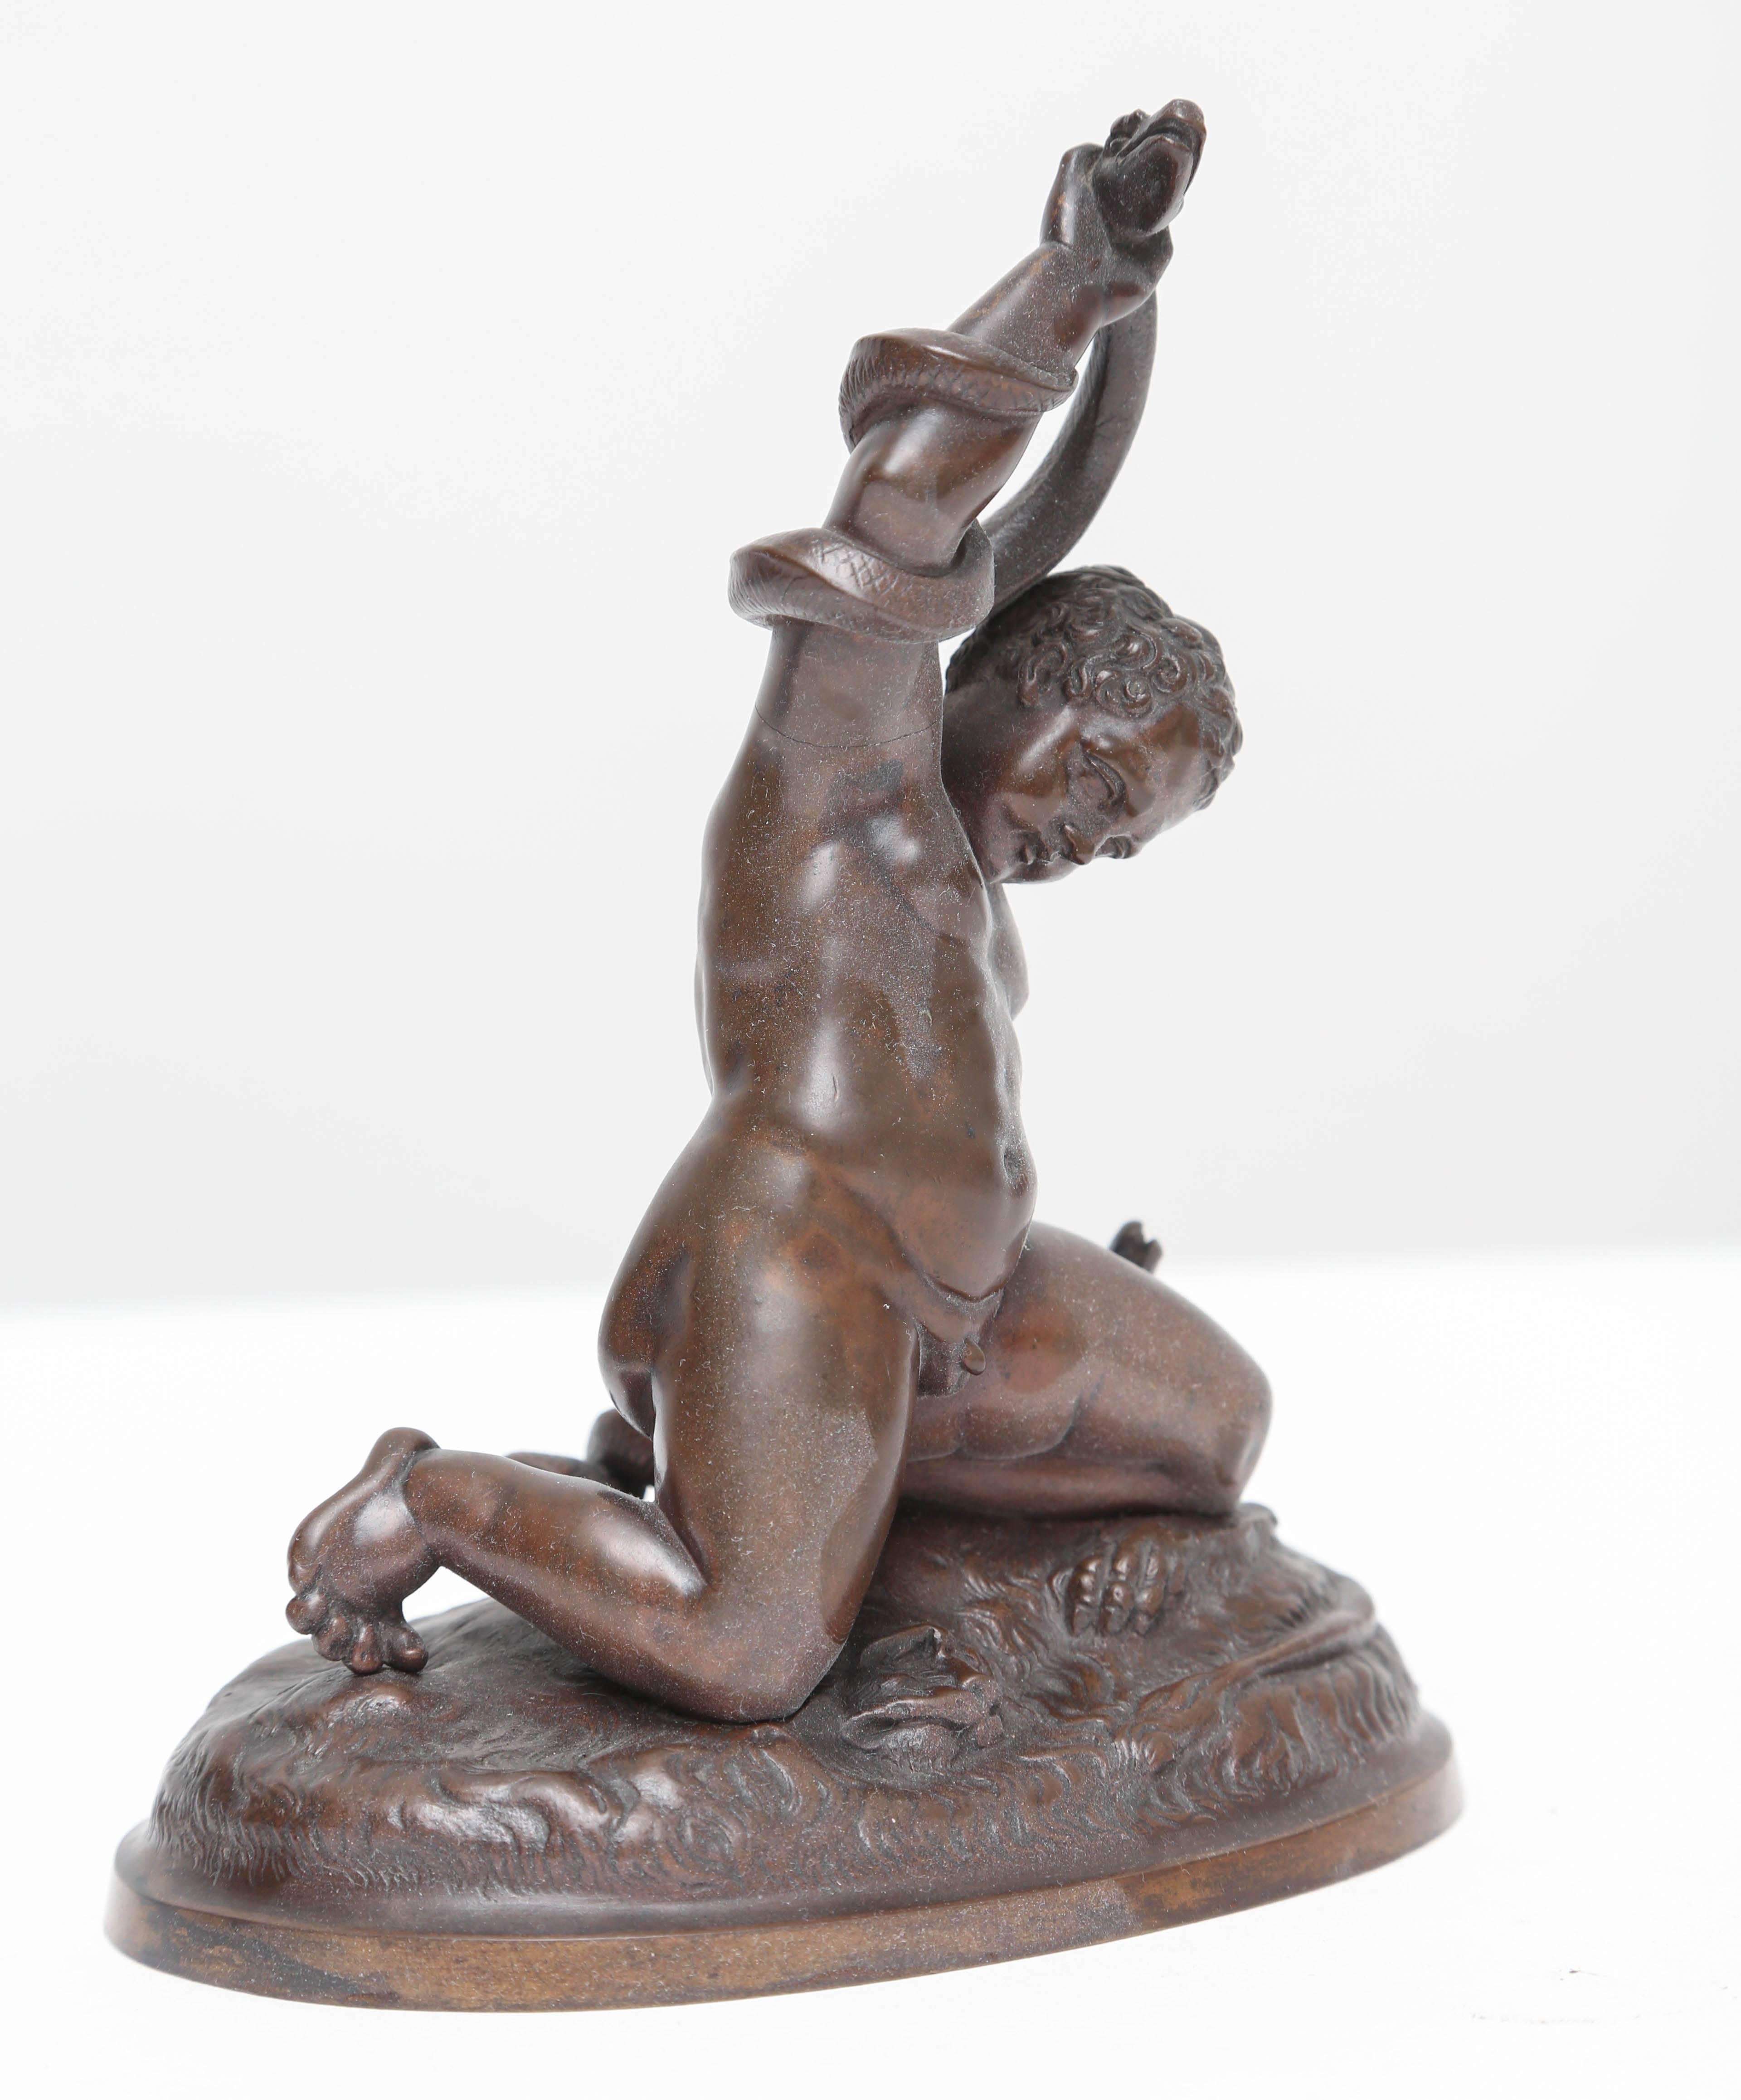 This early Grand Tour bronze of the child Hercules wrestling serpents depicts an event in his young life which showed his strength and heroism.